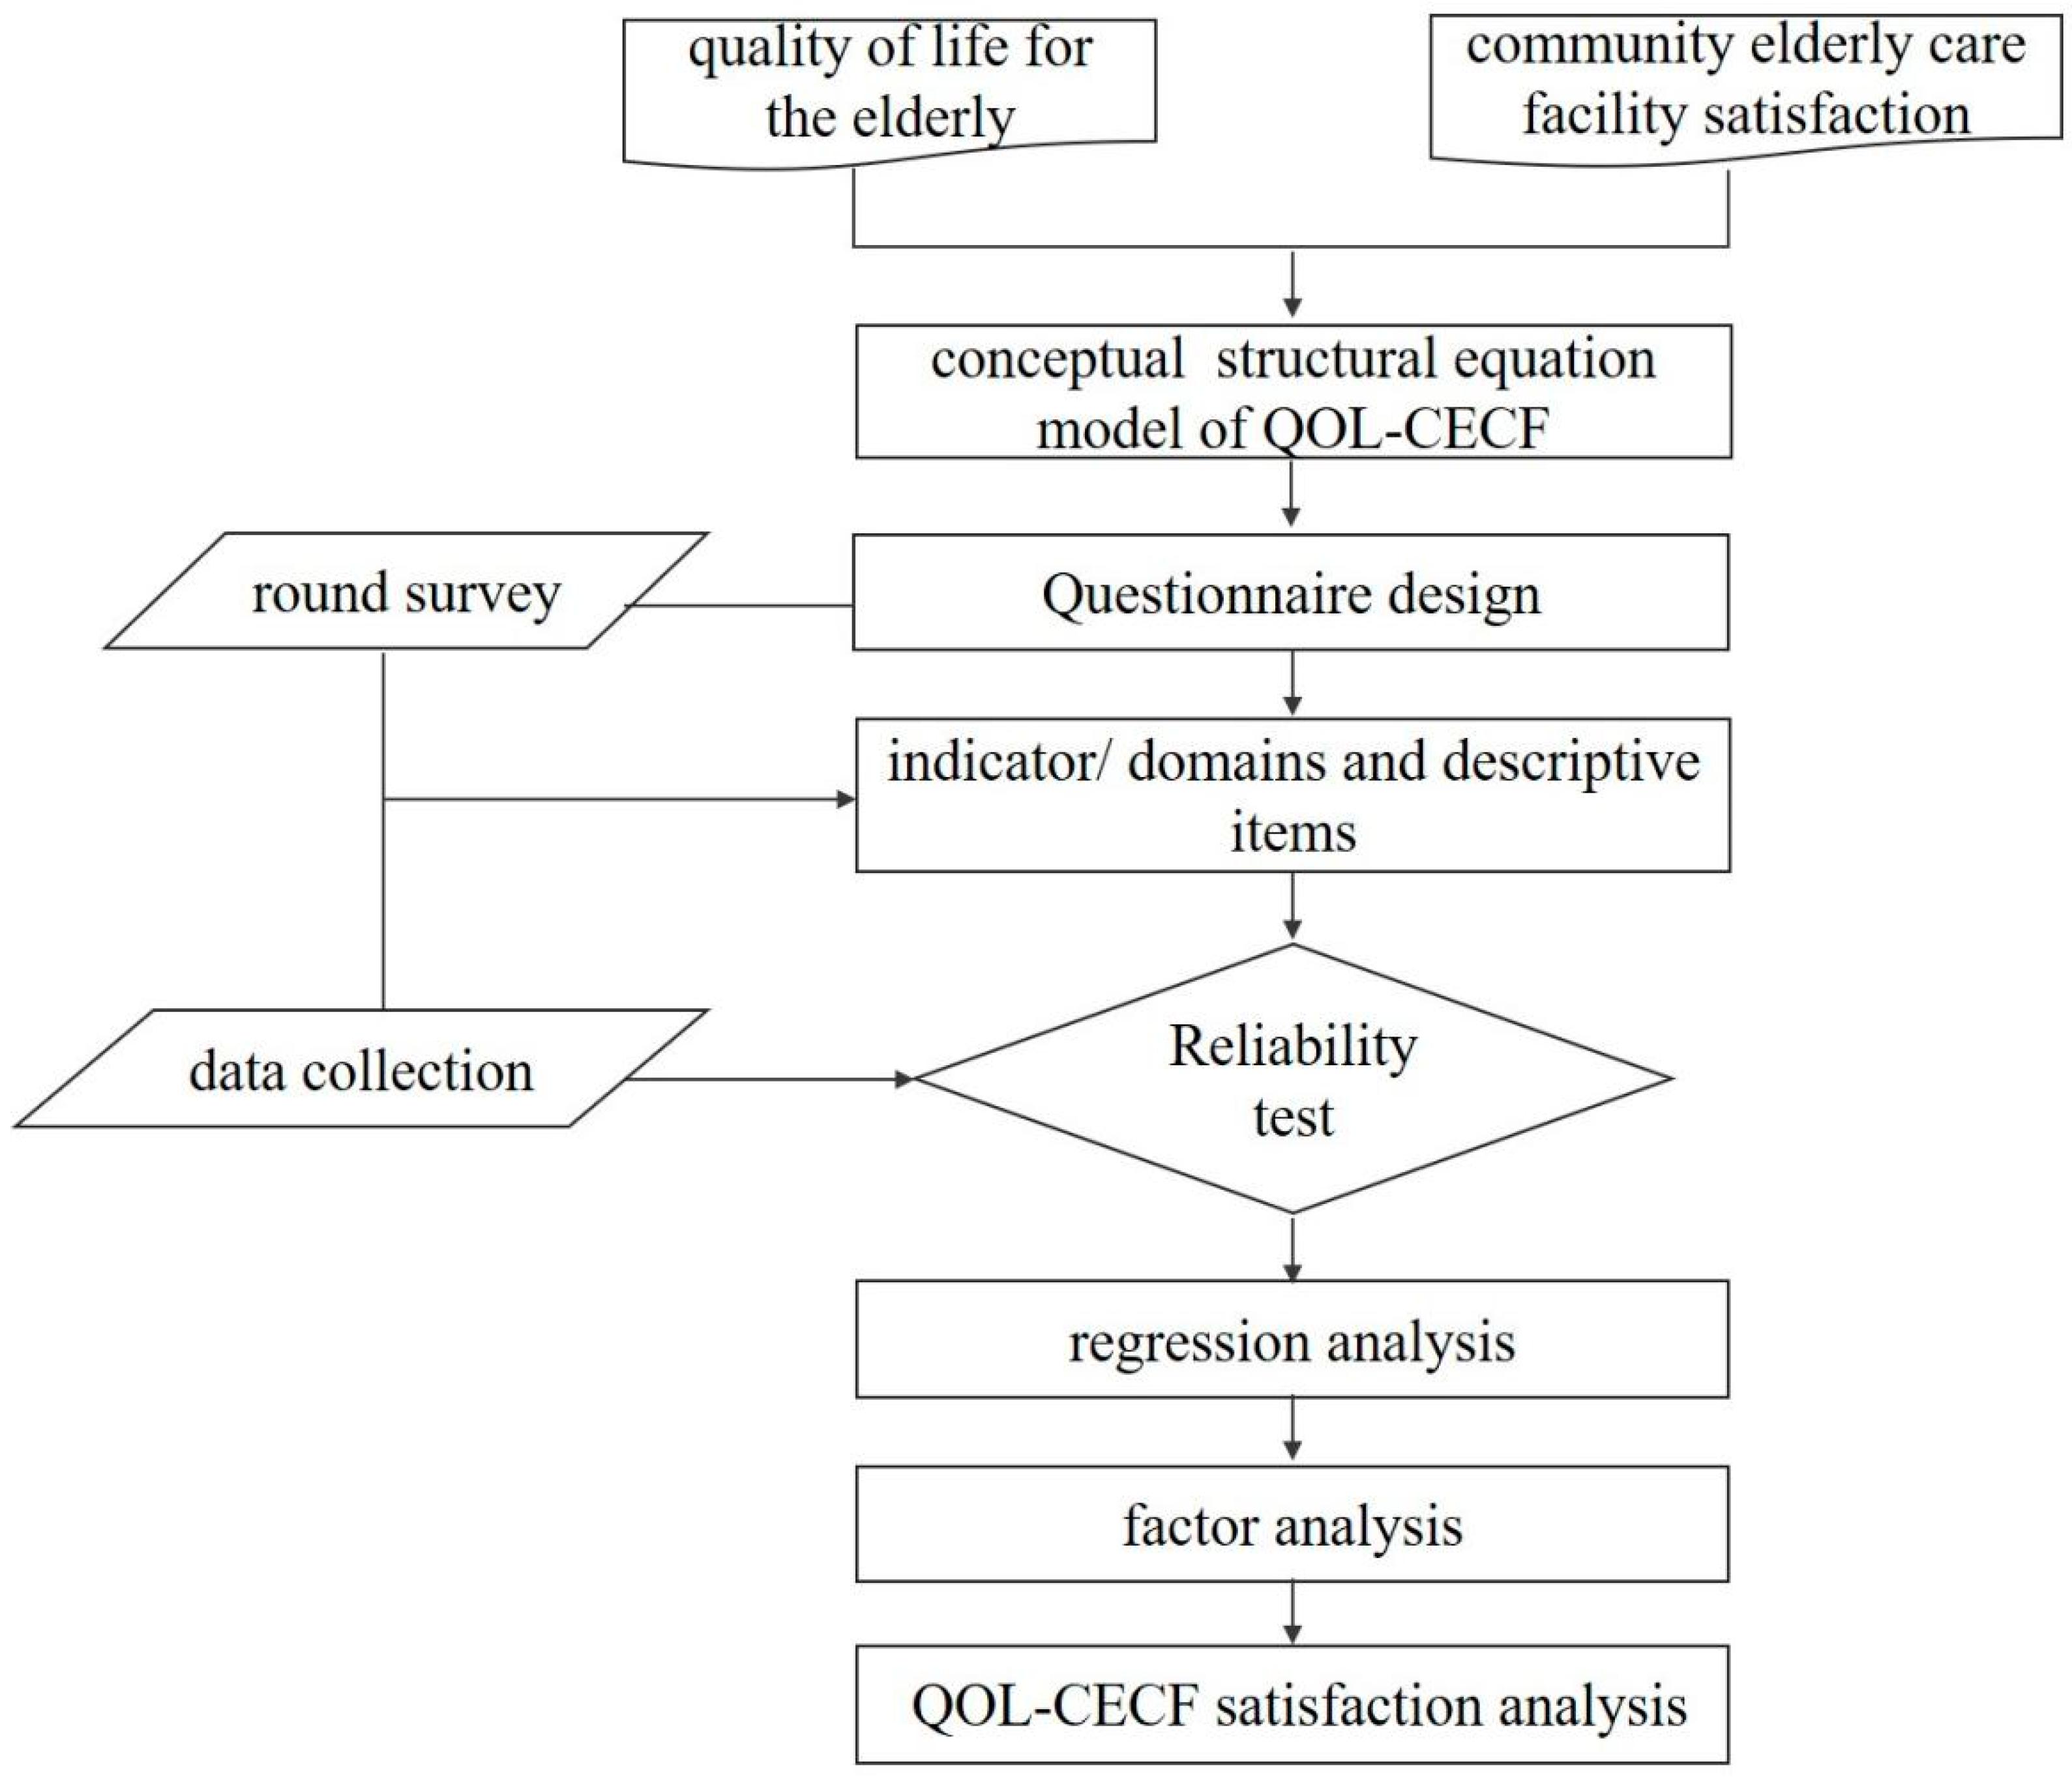 Sustainability | Free Full-Text | Research on Urban Community Elderly Care  Facility Based on Quality of Life by SEM: Cases Study of Three Types of  Communities in Shenzhen, China